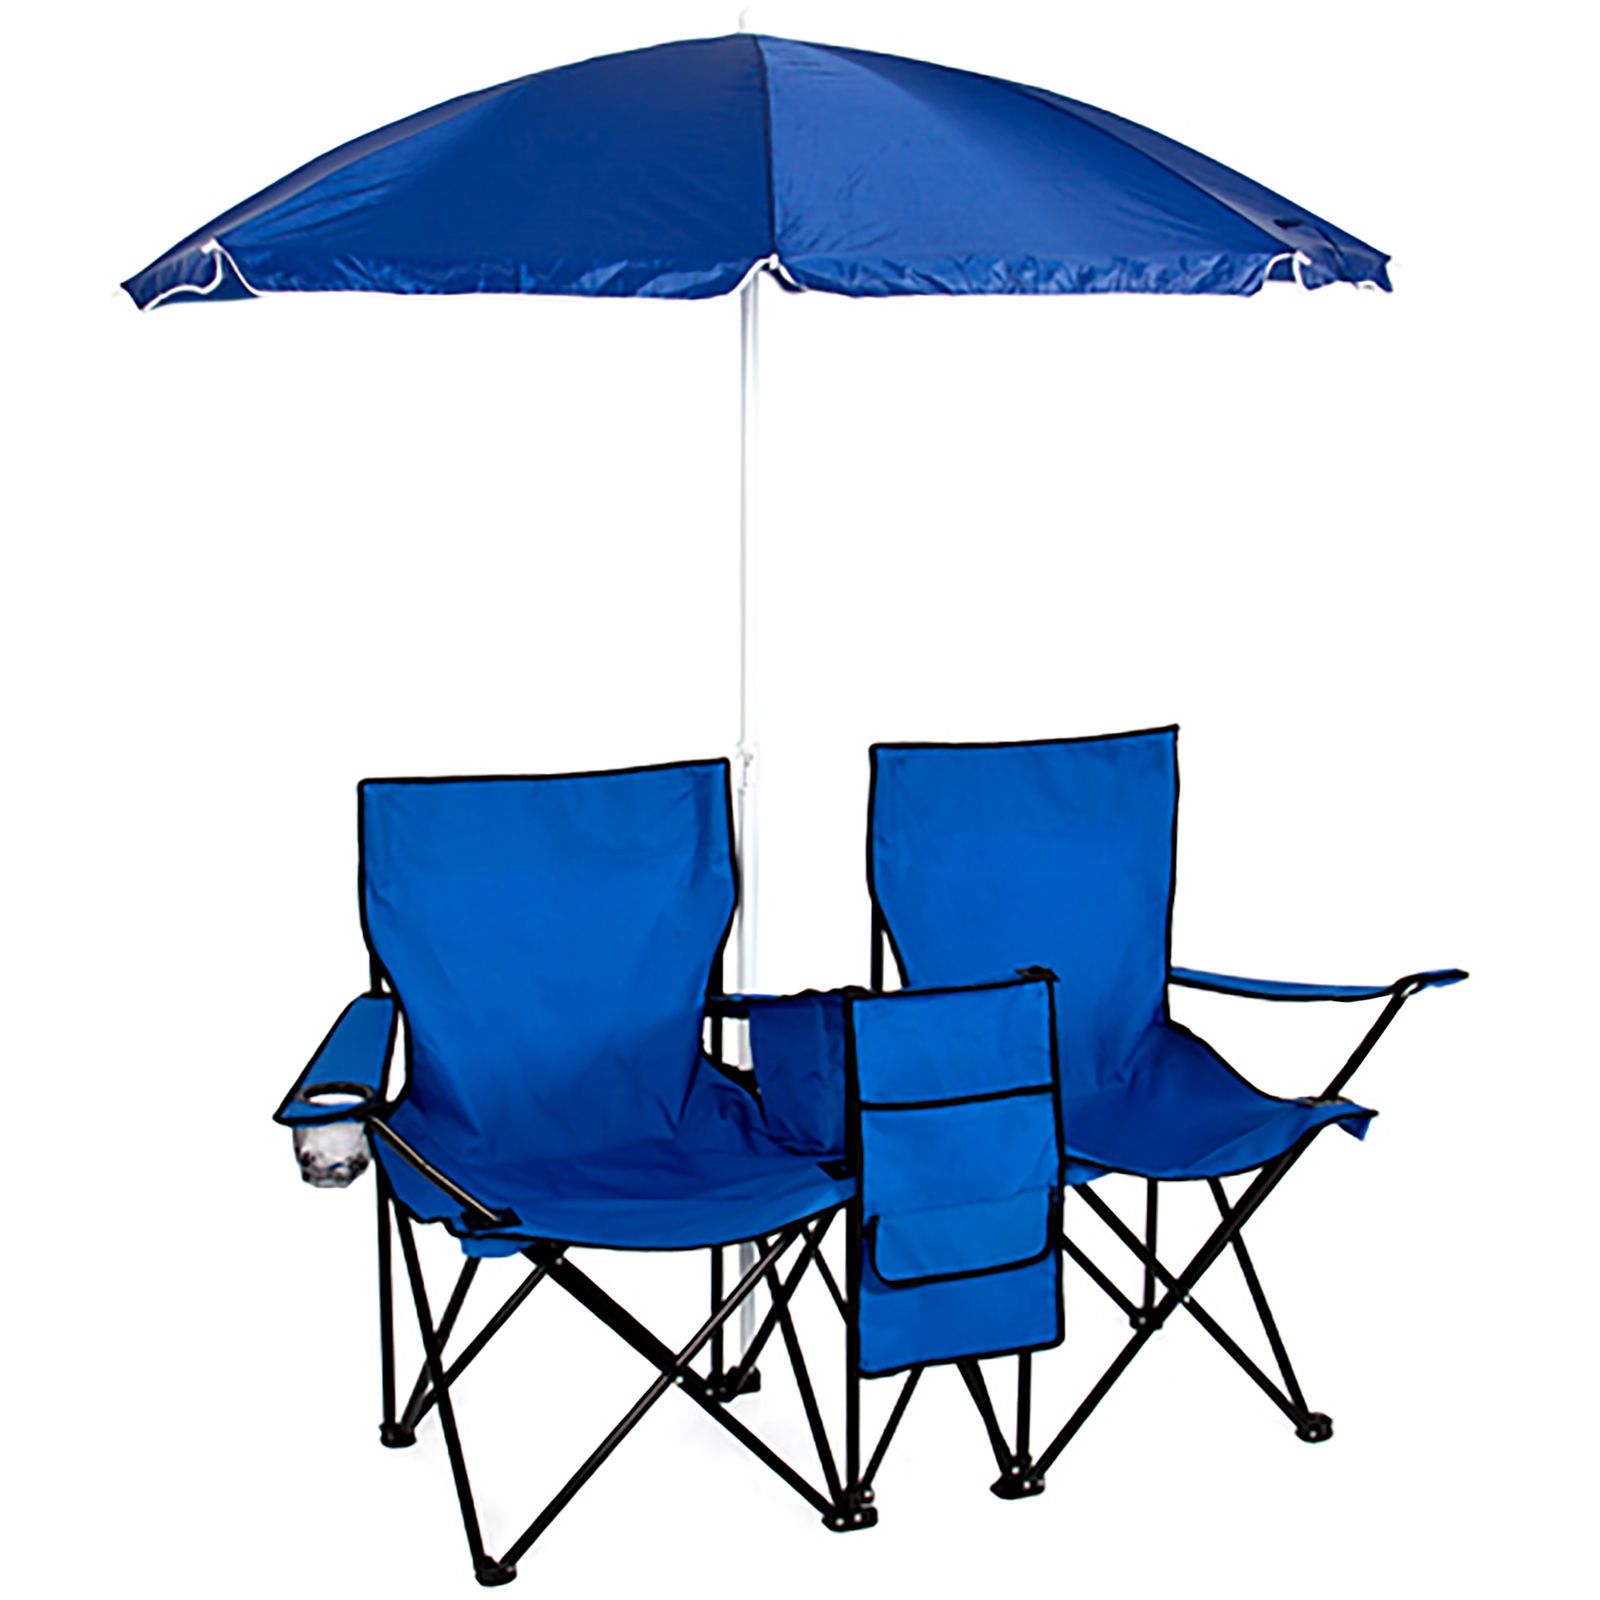 2020 picnic double folding chair w umbrella table cooler